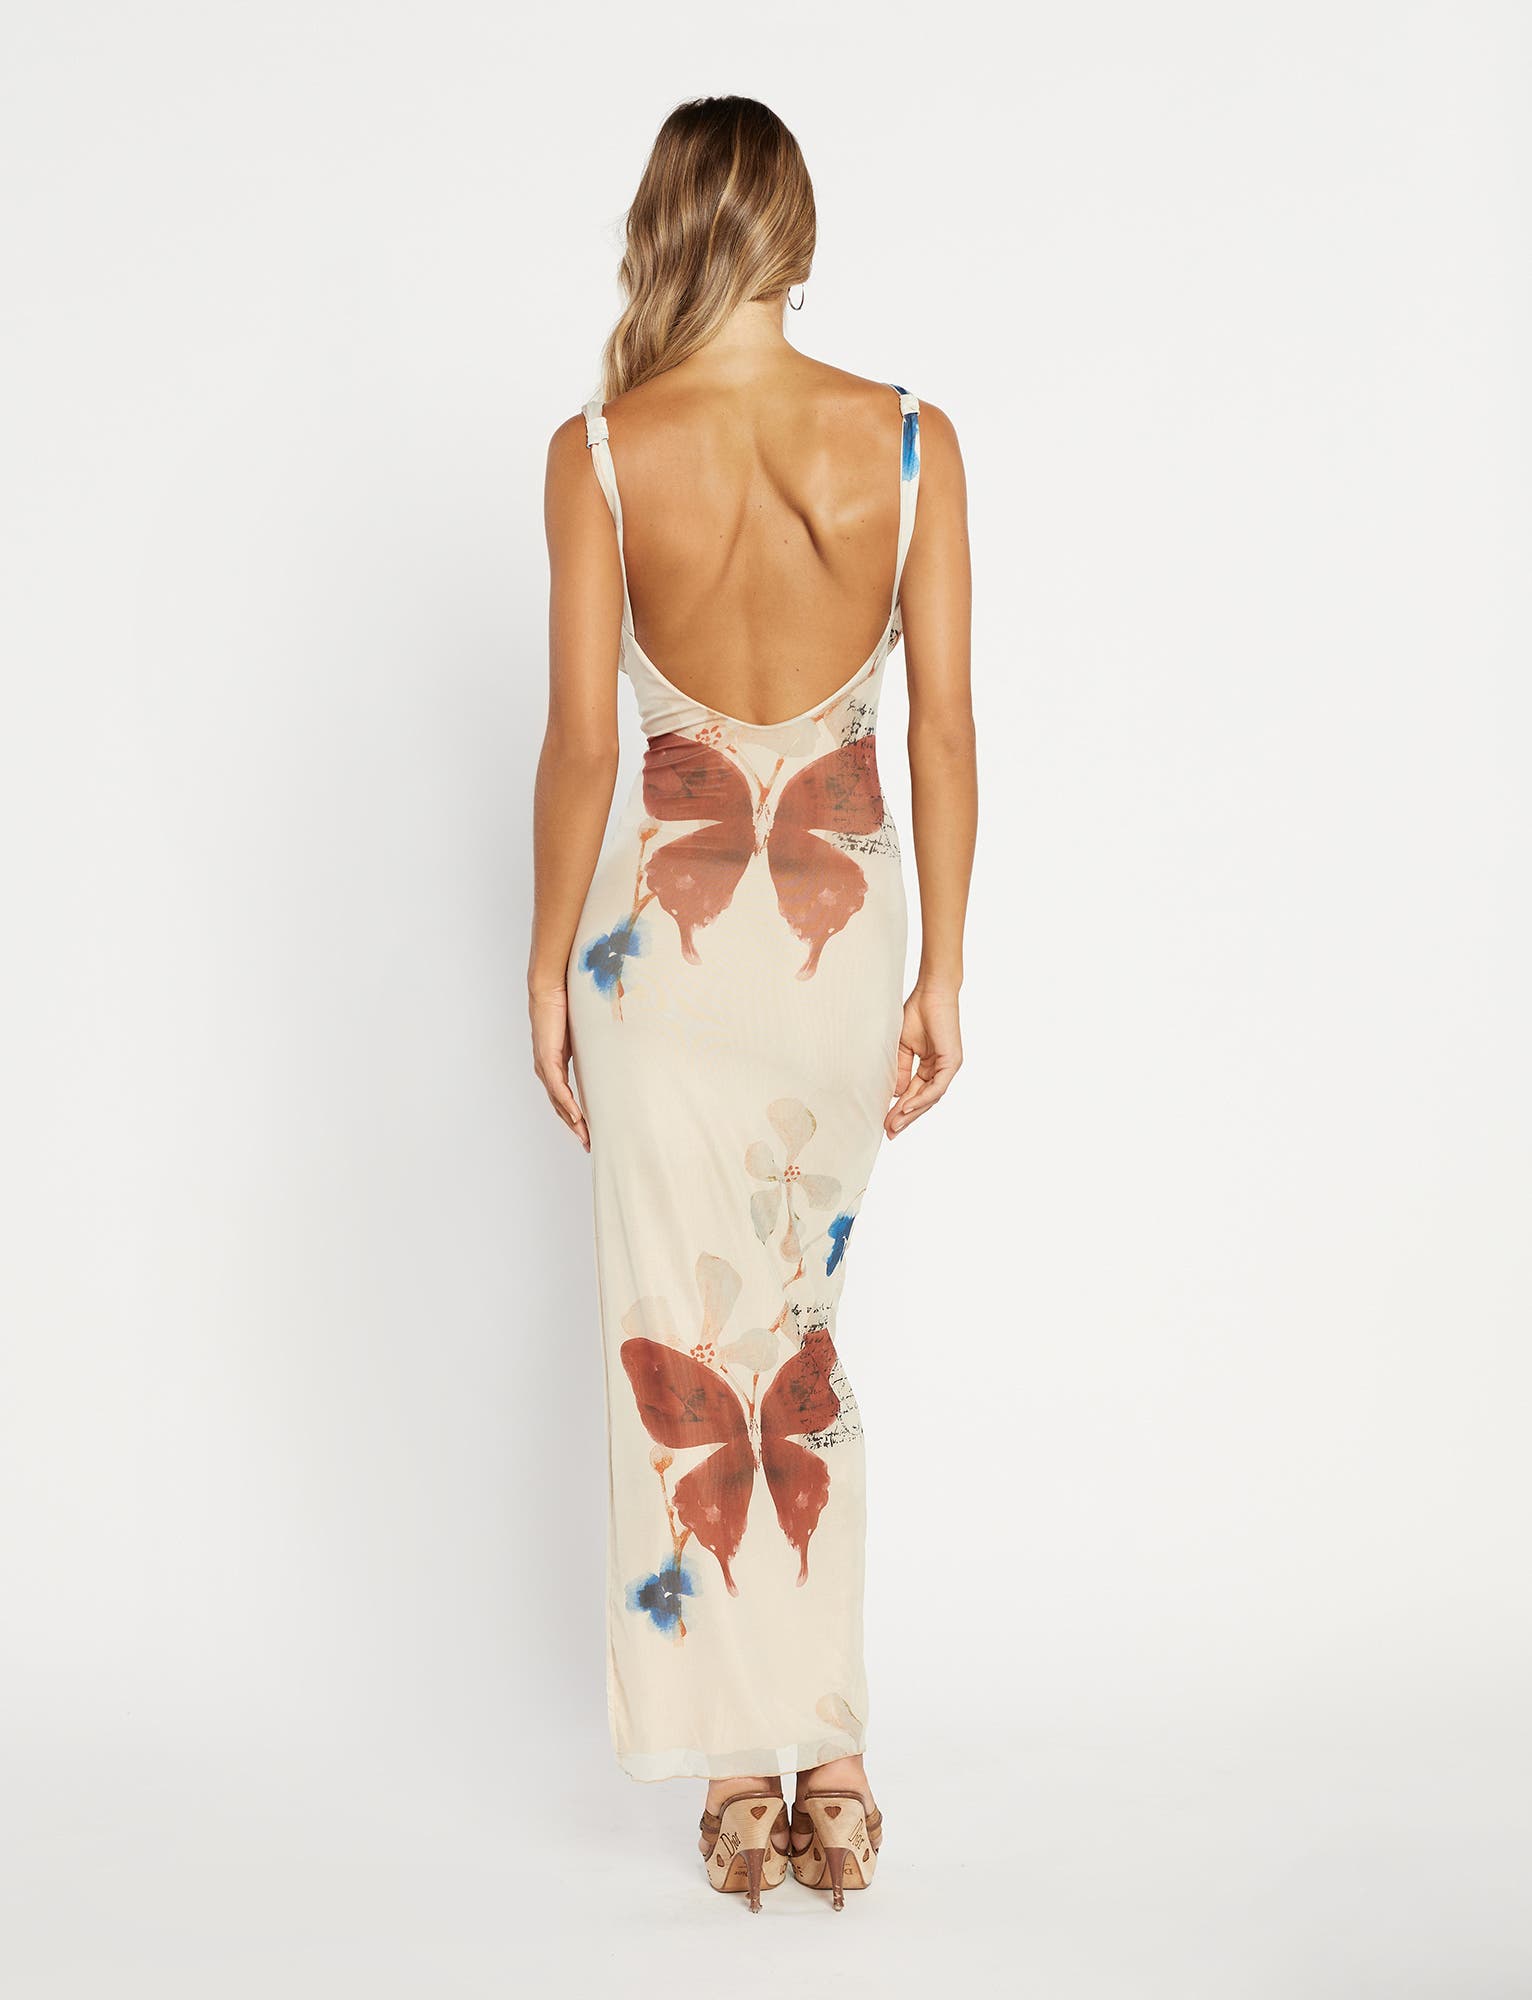 PERCY MAXI DRESS - NEUTRAL : PAISLEY : BY POPPY BUTTERFLY